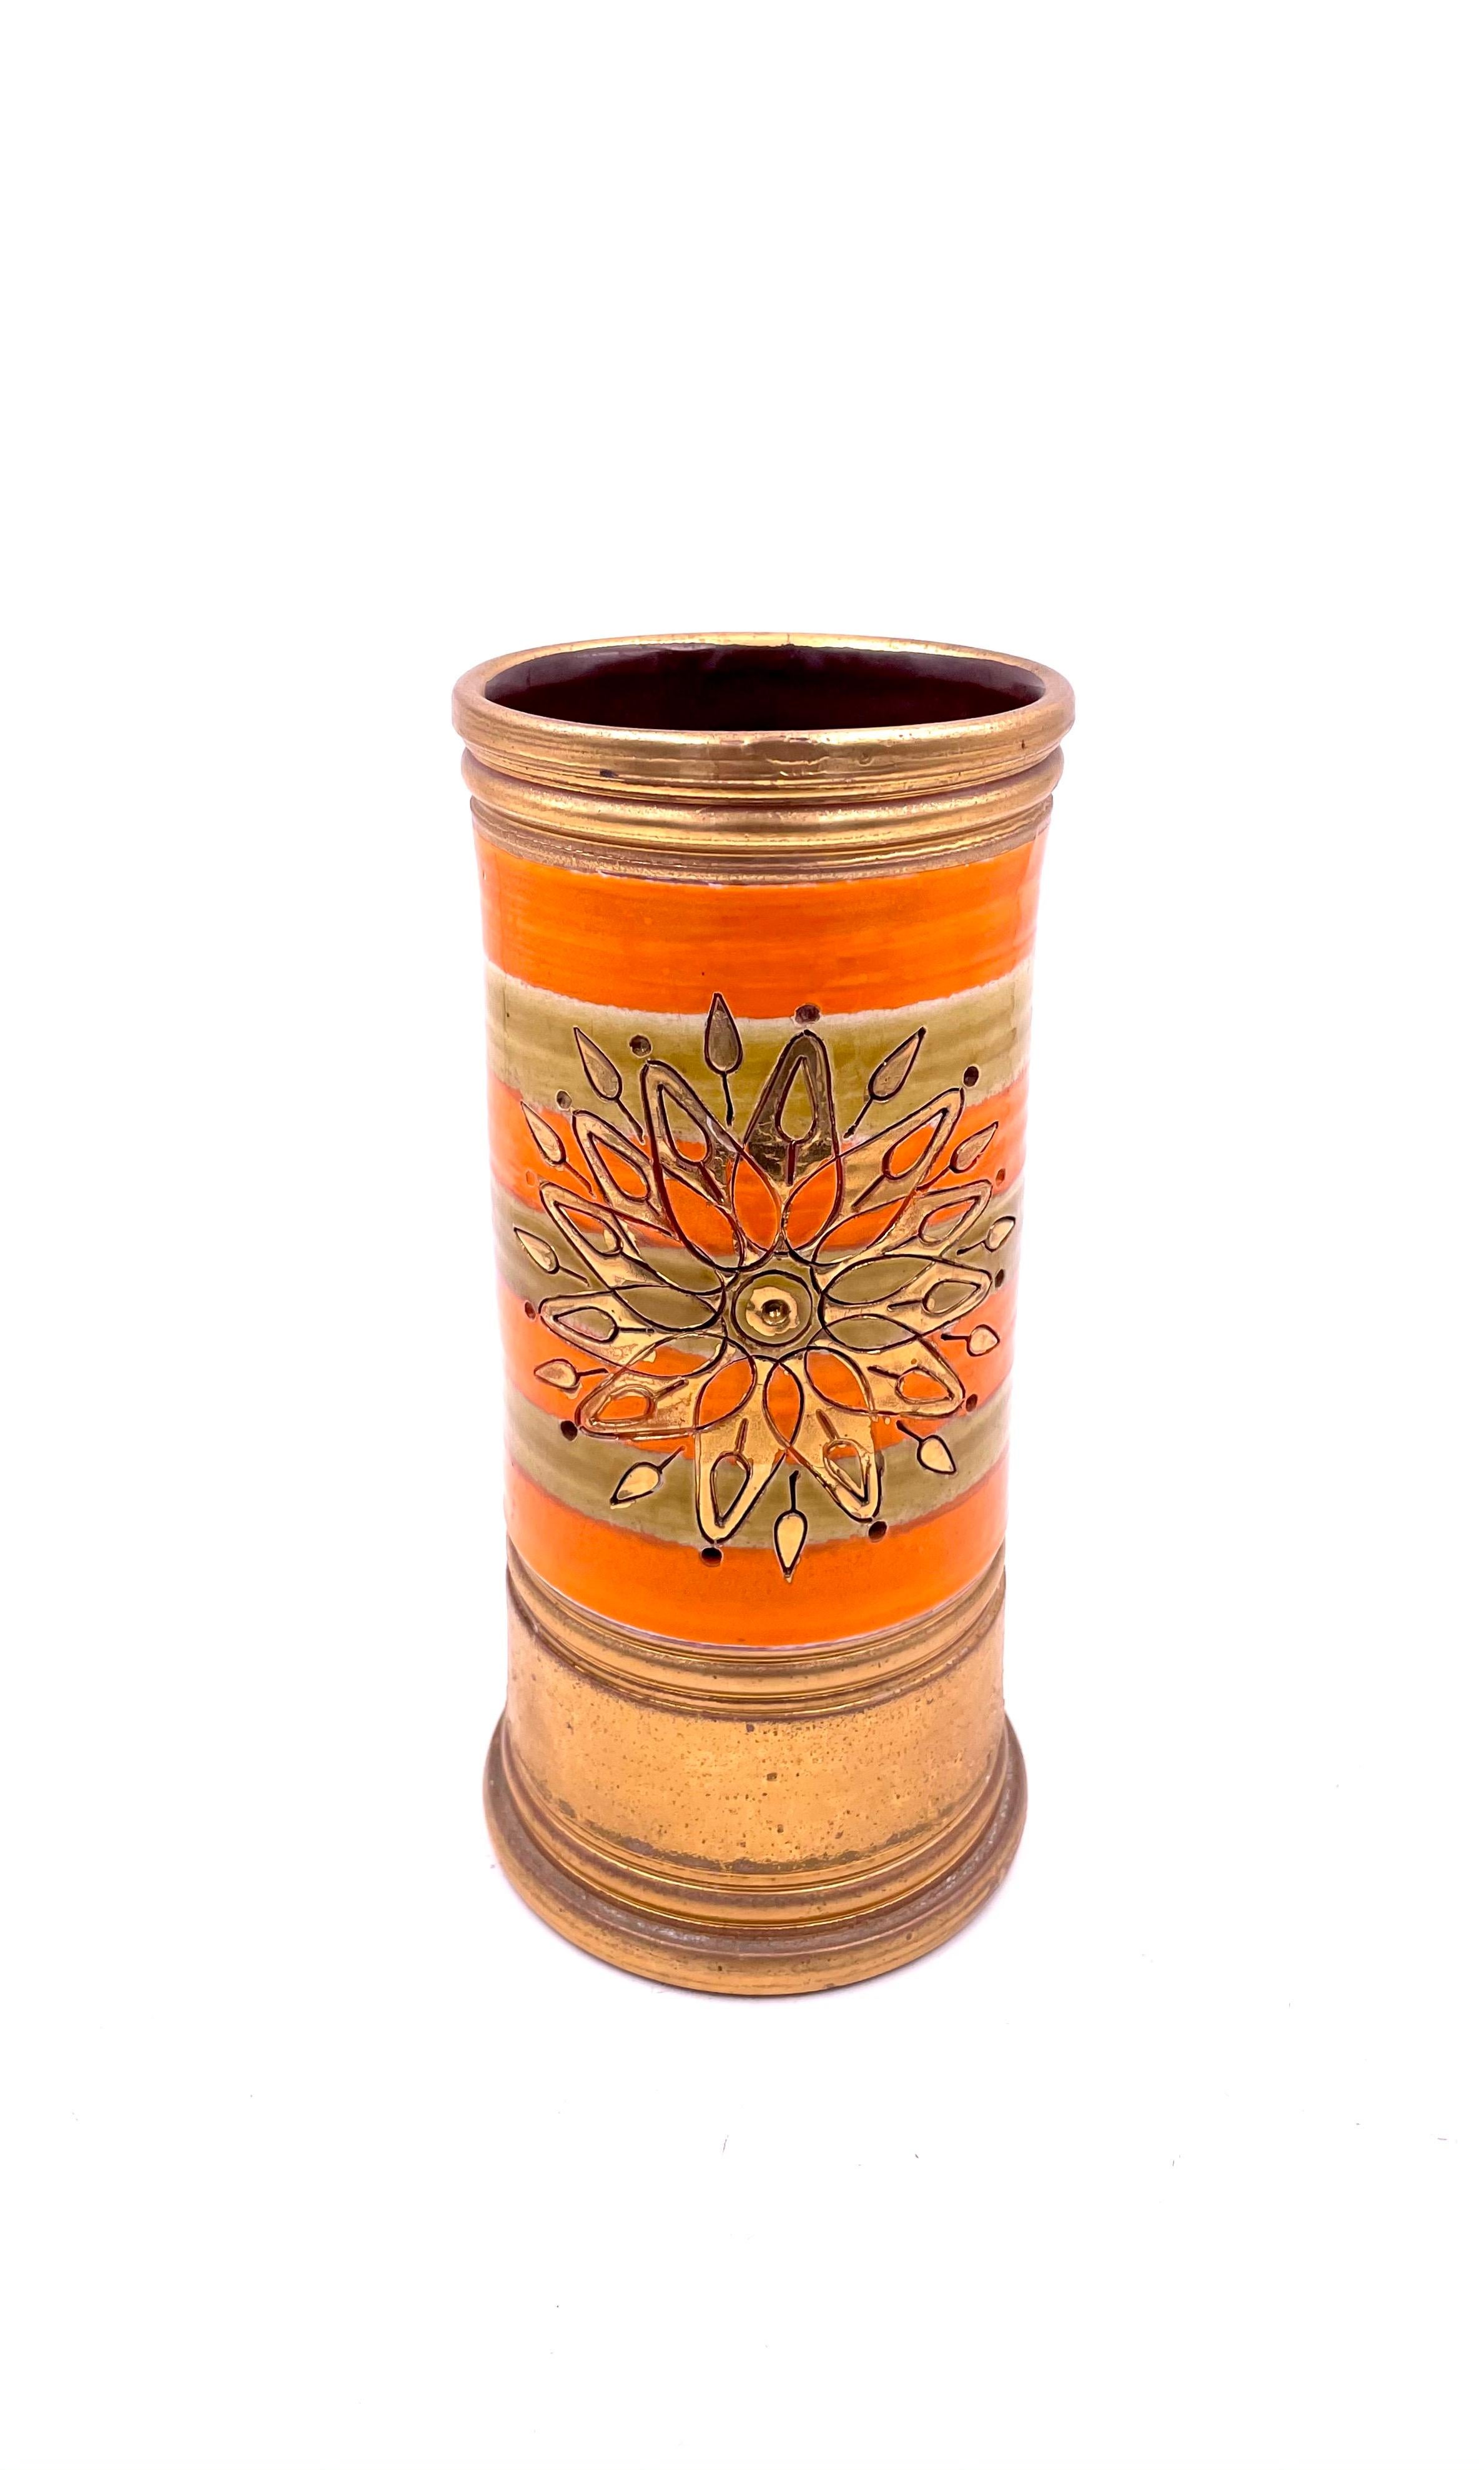 Beautiful 1960's hand-thrown Italian vase in ceramic, with hand-painted motifs in beautiful colors orange & gold.